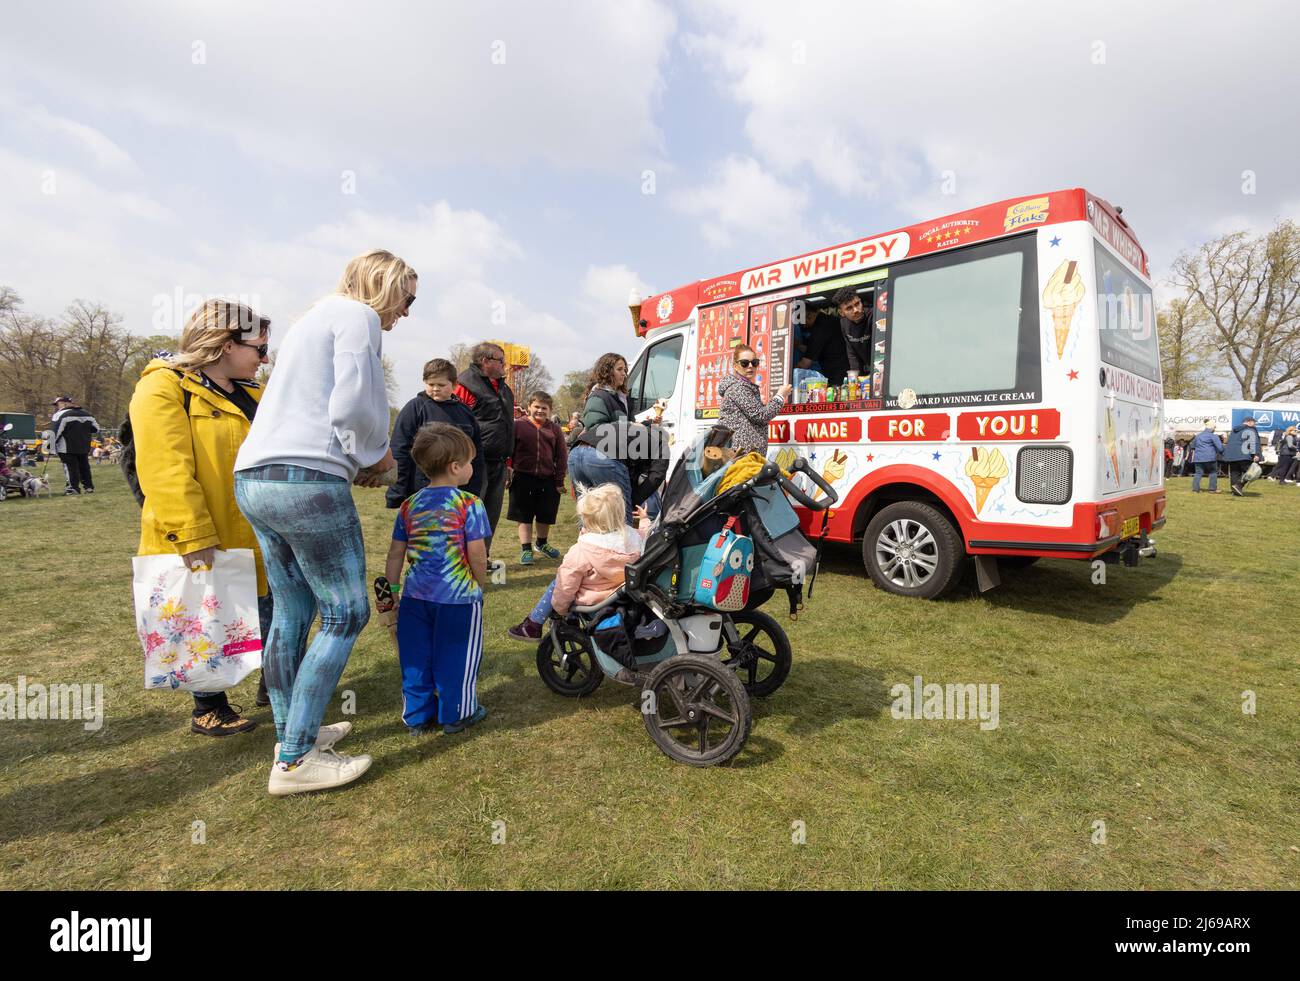 Ice cream van UK; a family with children in a queue to buy ice cream from a Mr Whippy Ice Cream man, on a sunny day in spring, Suffolk UK Stock Photo